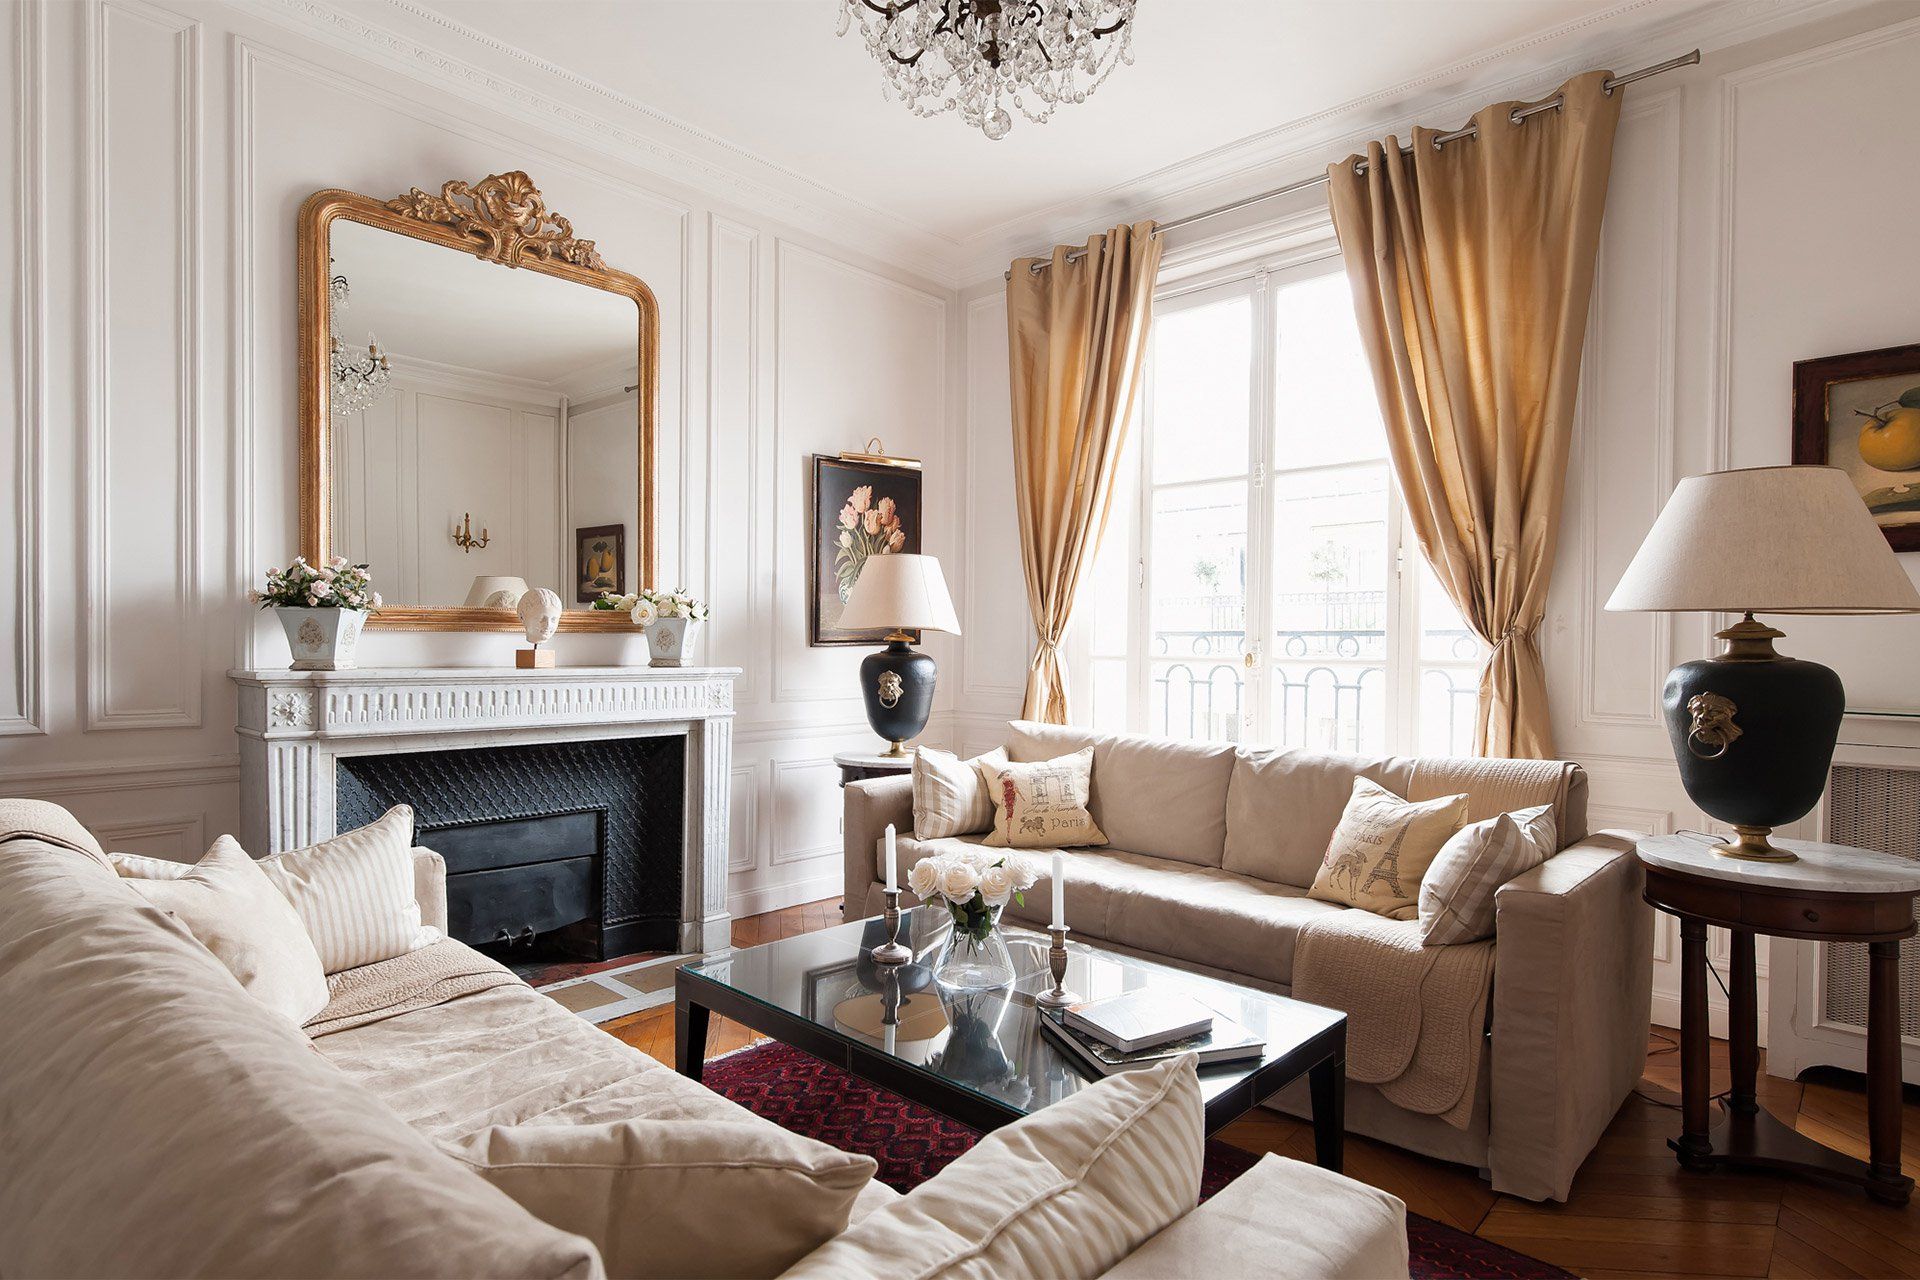 Parisian Charm: Designing Spaces Inspired By The City Of Love